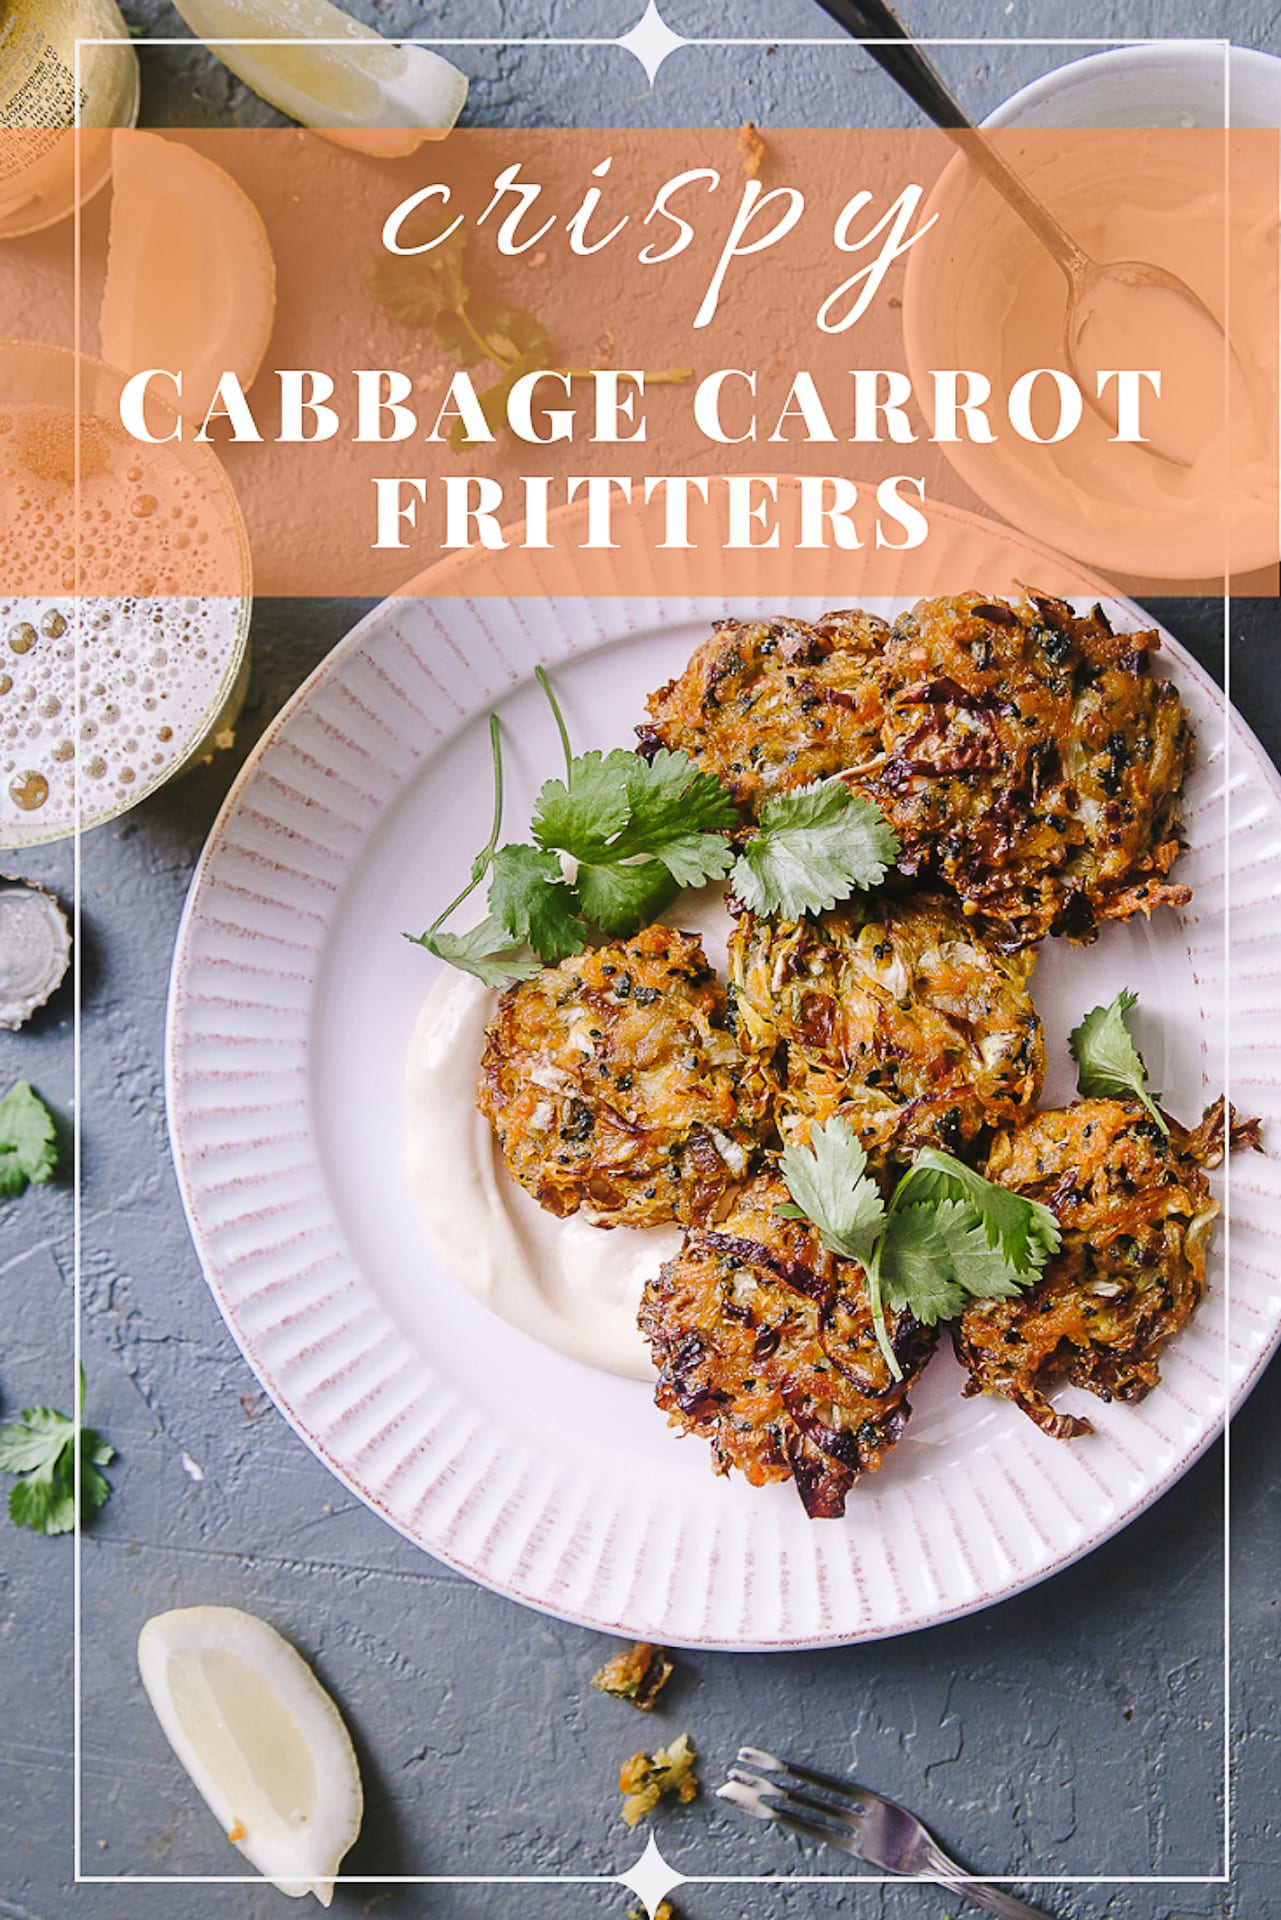 EASY with NO EGGS Crispy Cabbage and Carrot Fritters is a perfect snack for any day! #cabbage #carrot #fritters #foodphotography #vegetarian